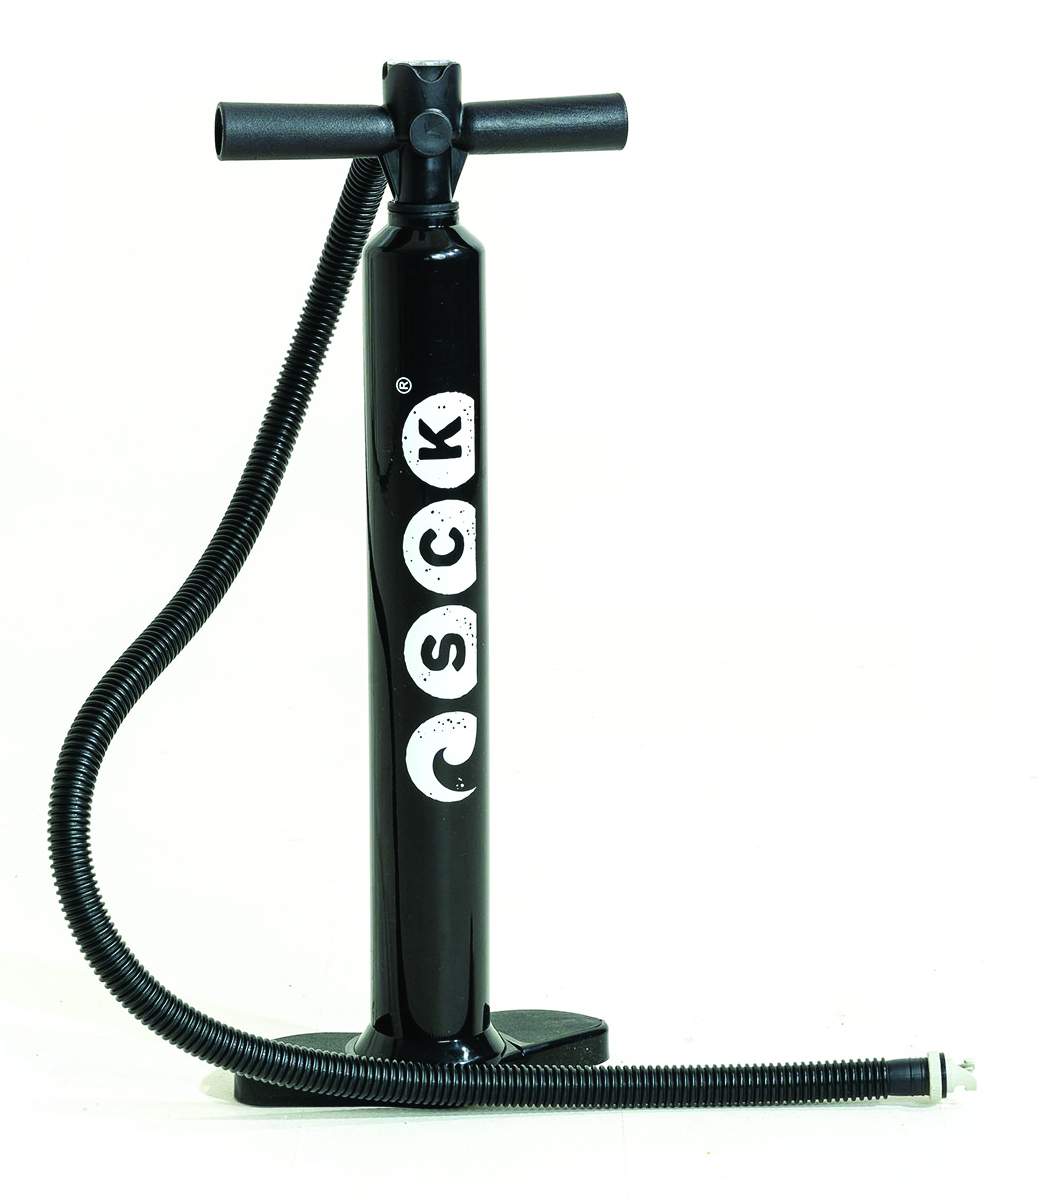 Pump included in the inflatable SUP package